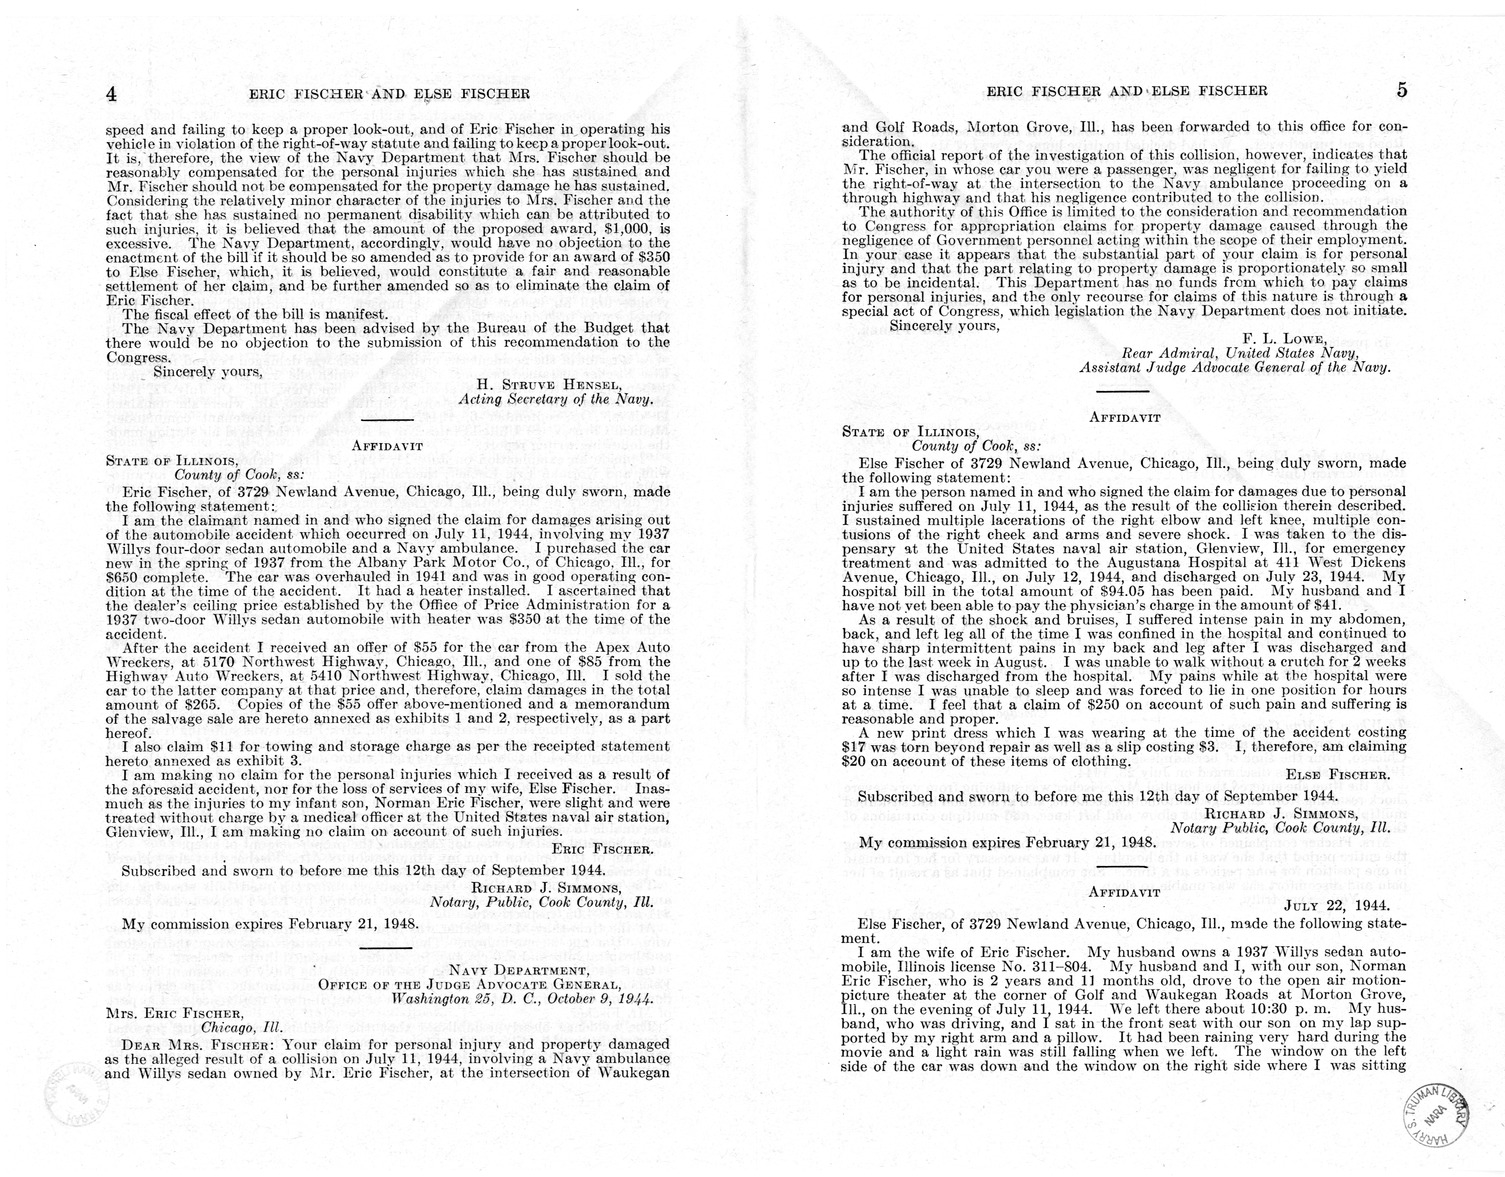 Memorandum from Frederick J. Bailey to M. C. Latta, H.R. 3273, For the Relief of Eric Fischer and Else Fischer, with Attachments